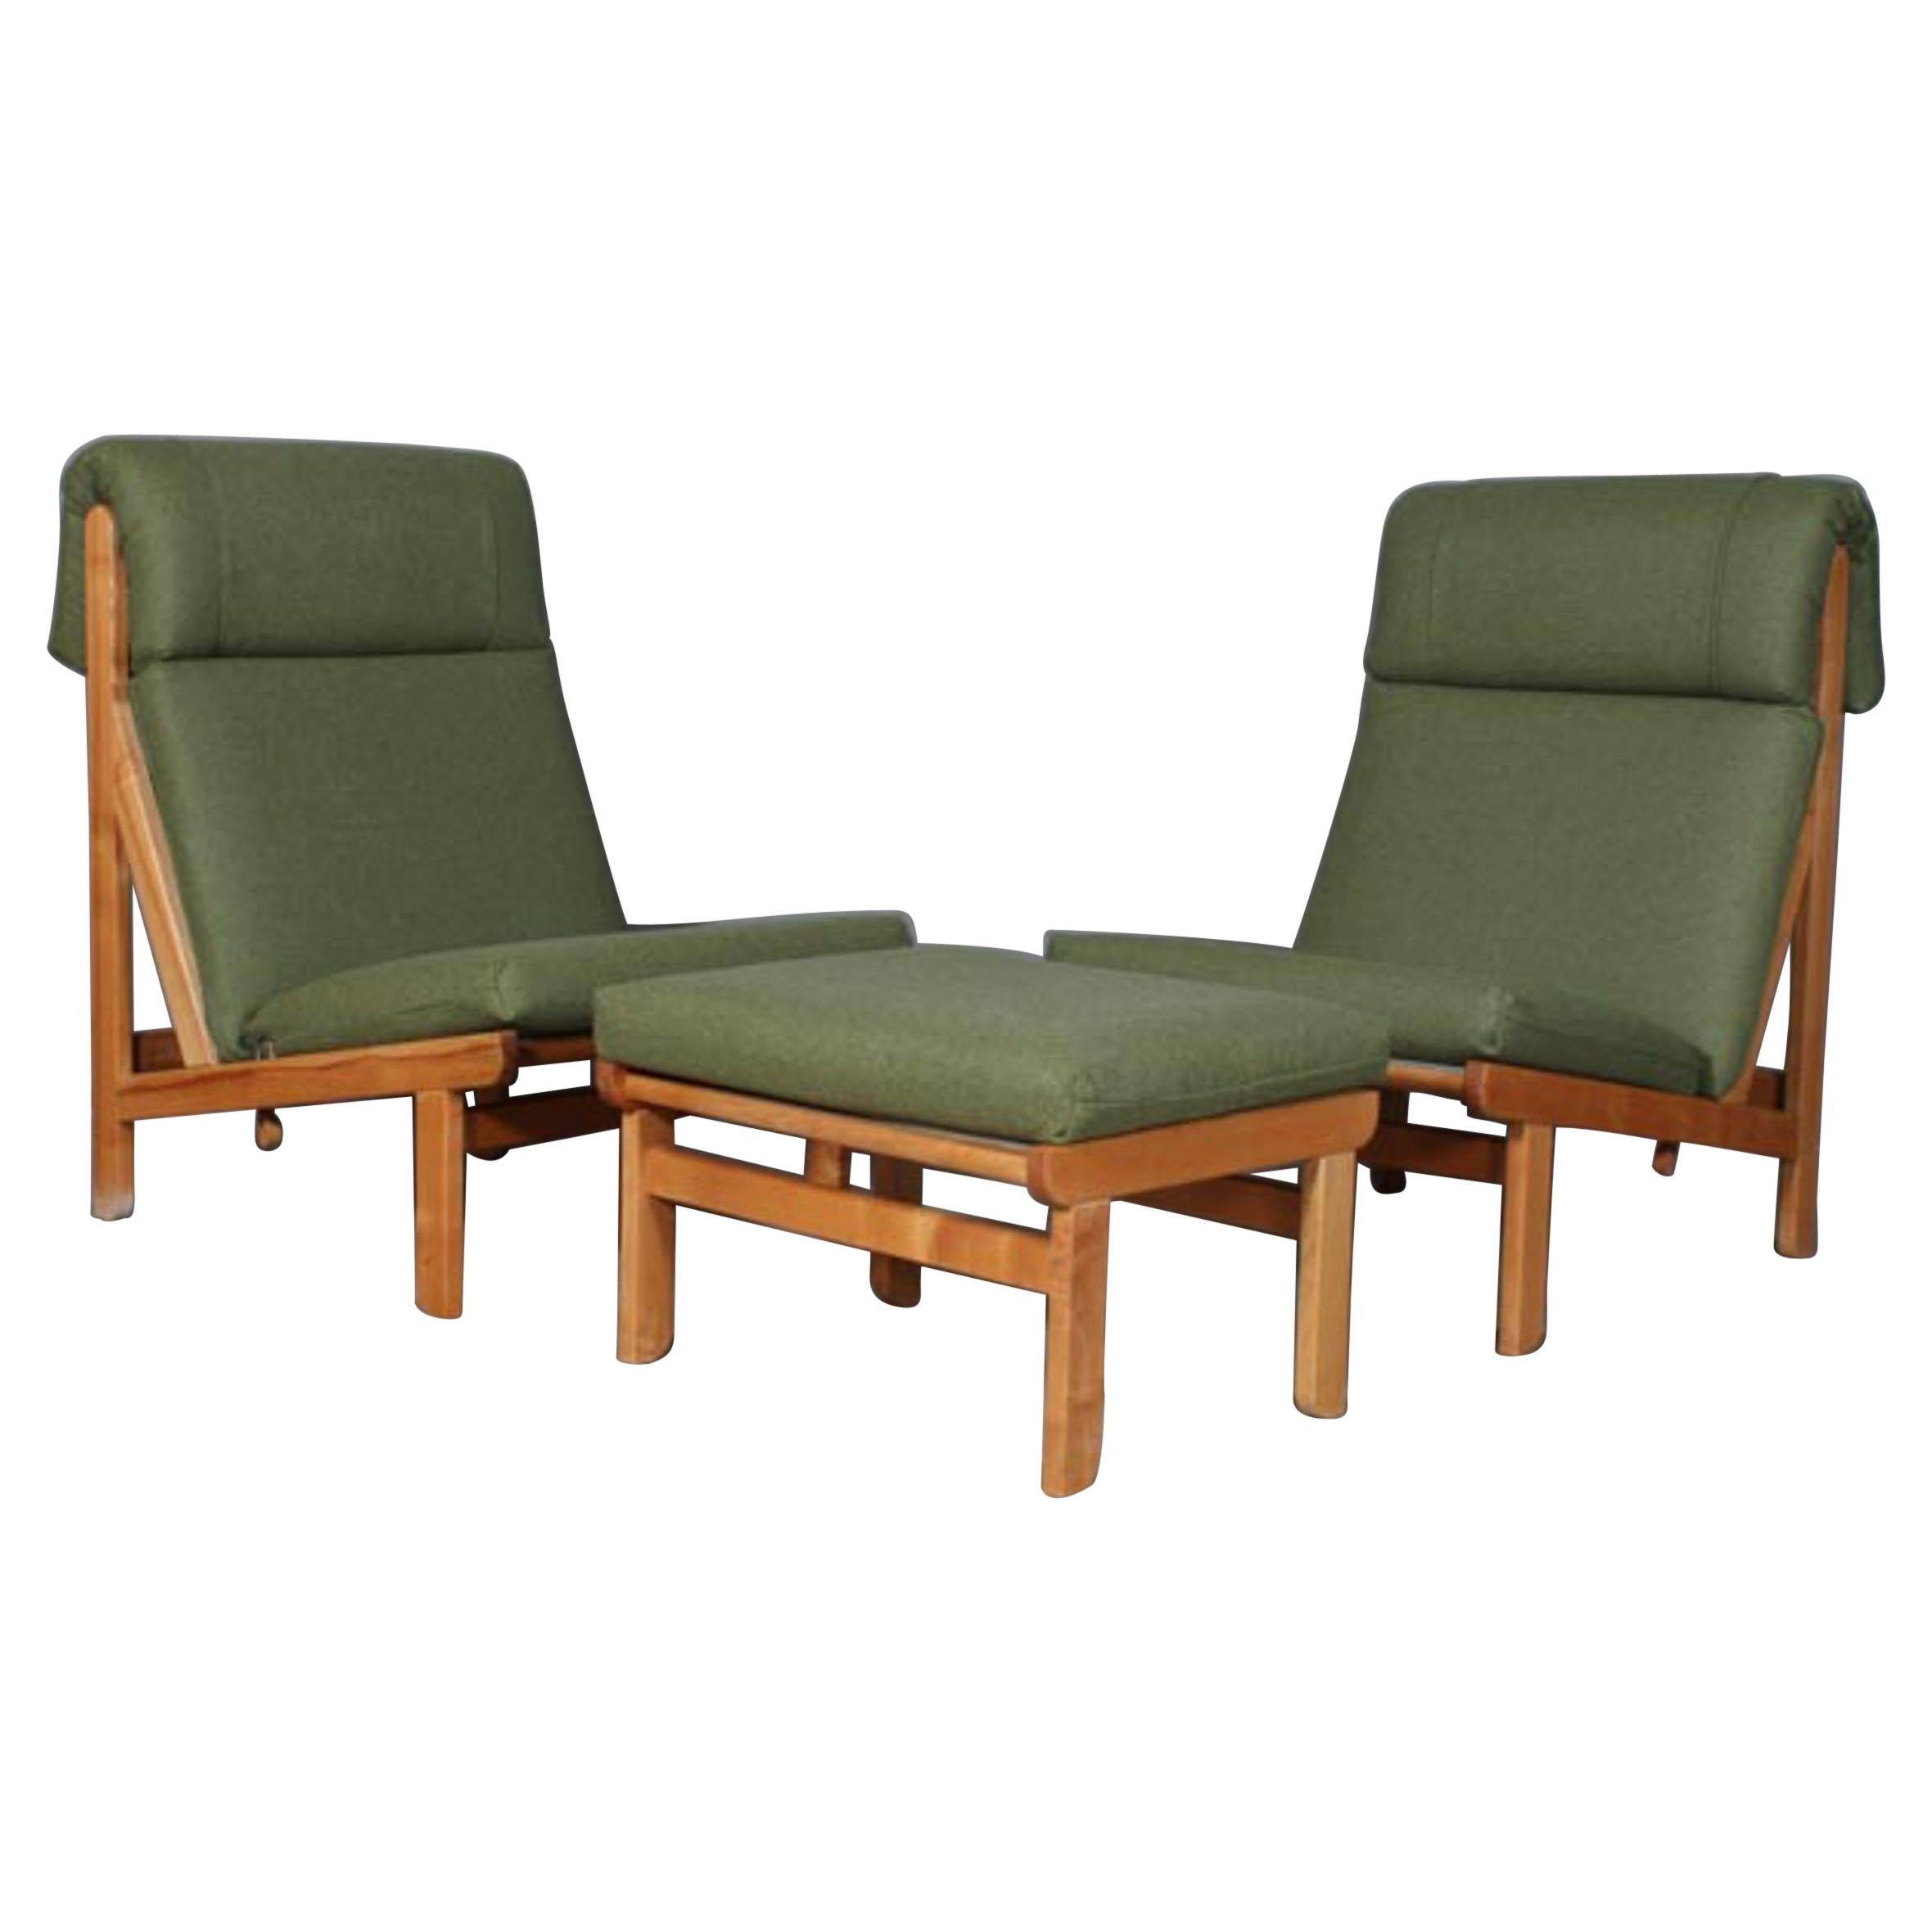 Pair of Danish "Rag" Easy Lounge Chairs in Pine and Fabric by Bernt Petersen